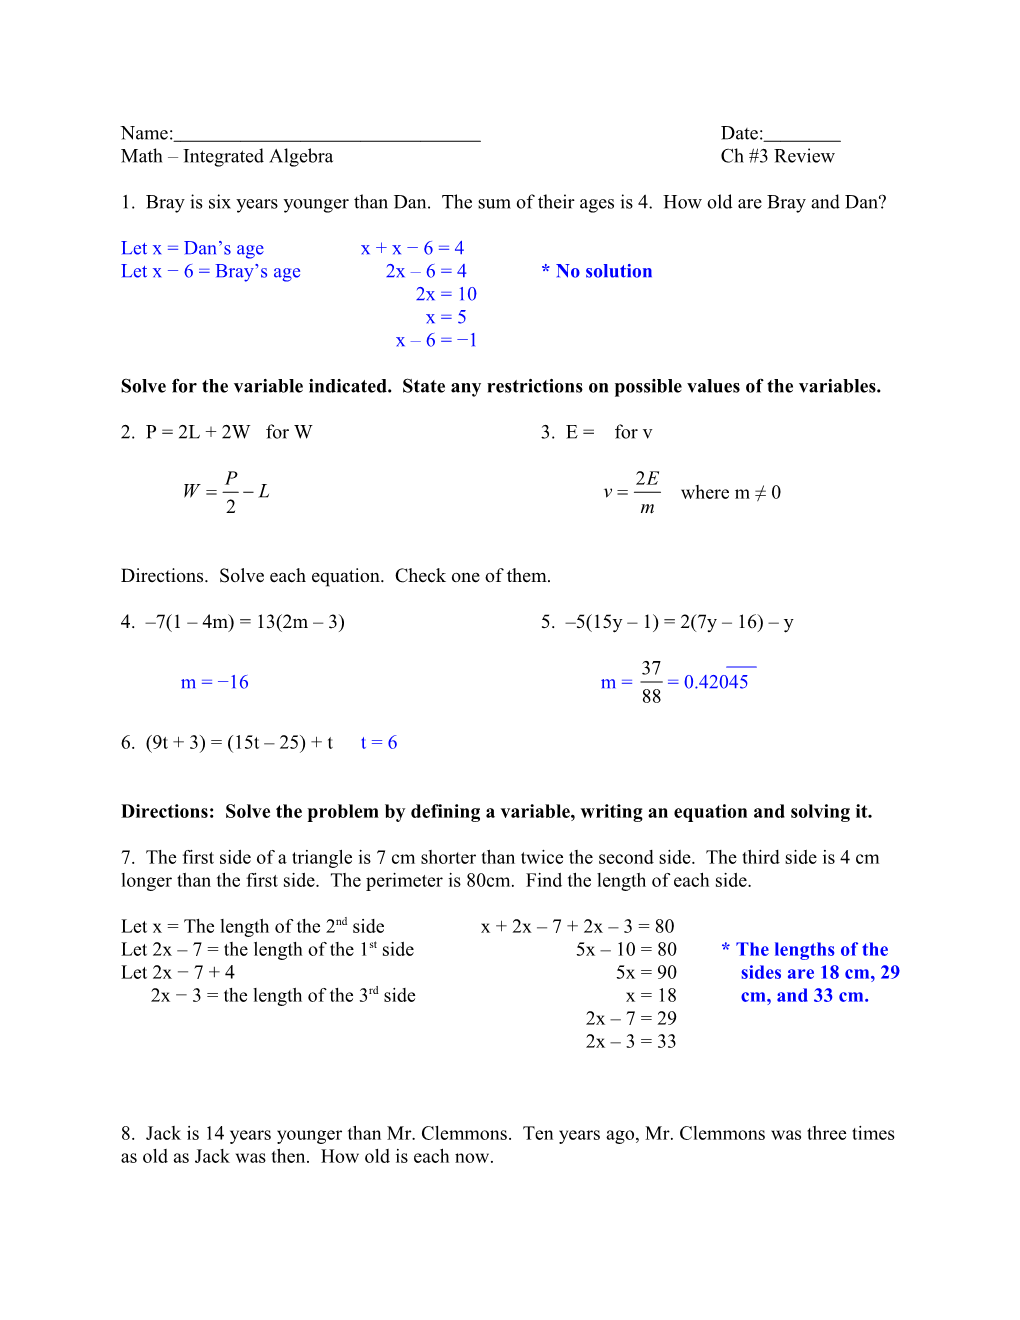 Math Integrated Algebra Ch #3 Review